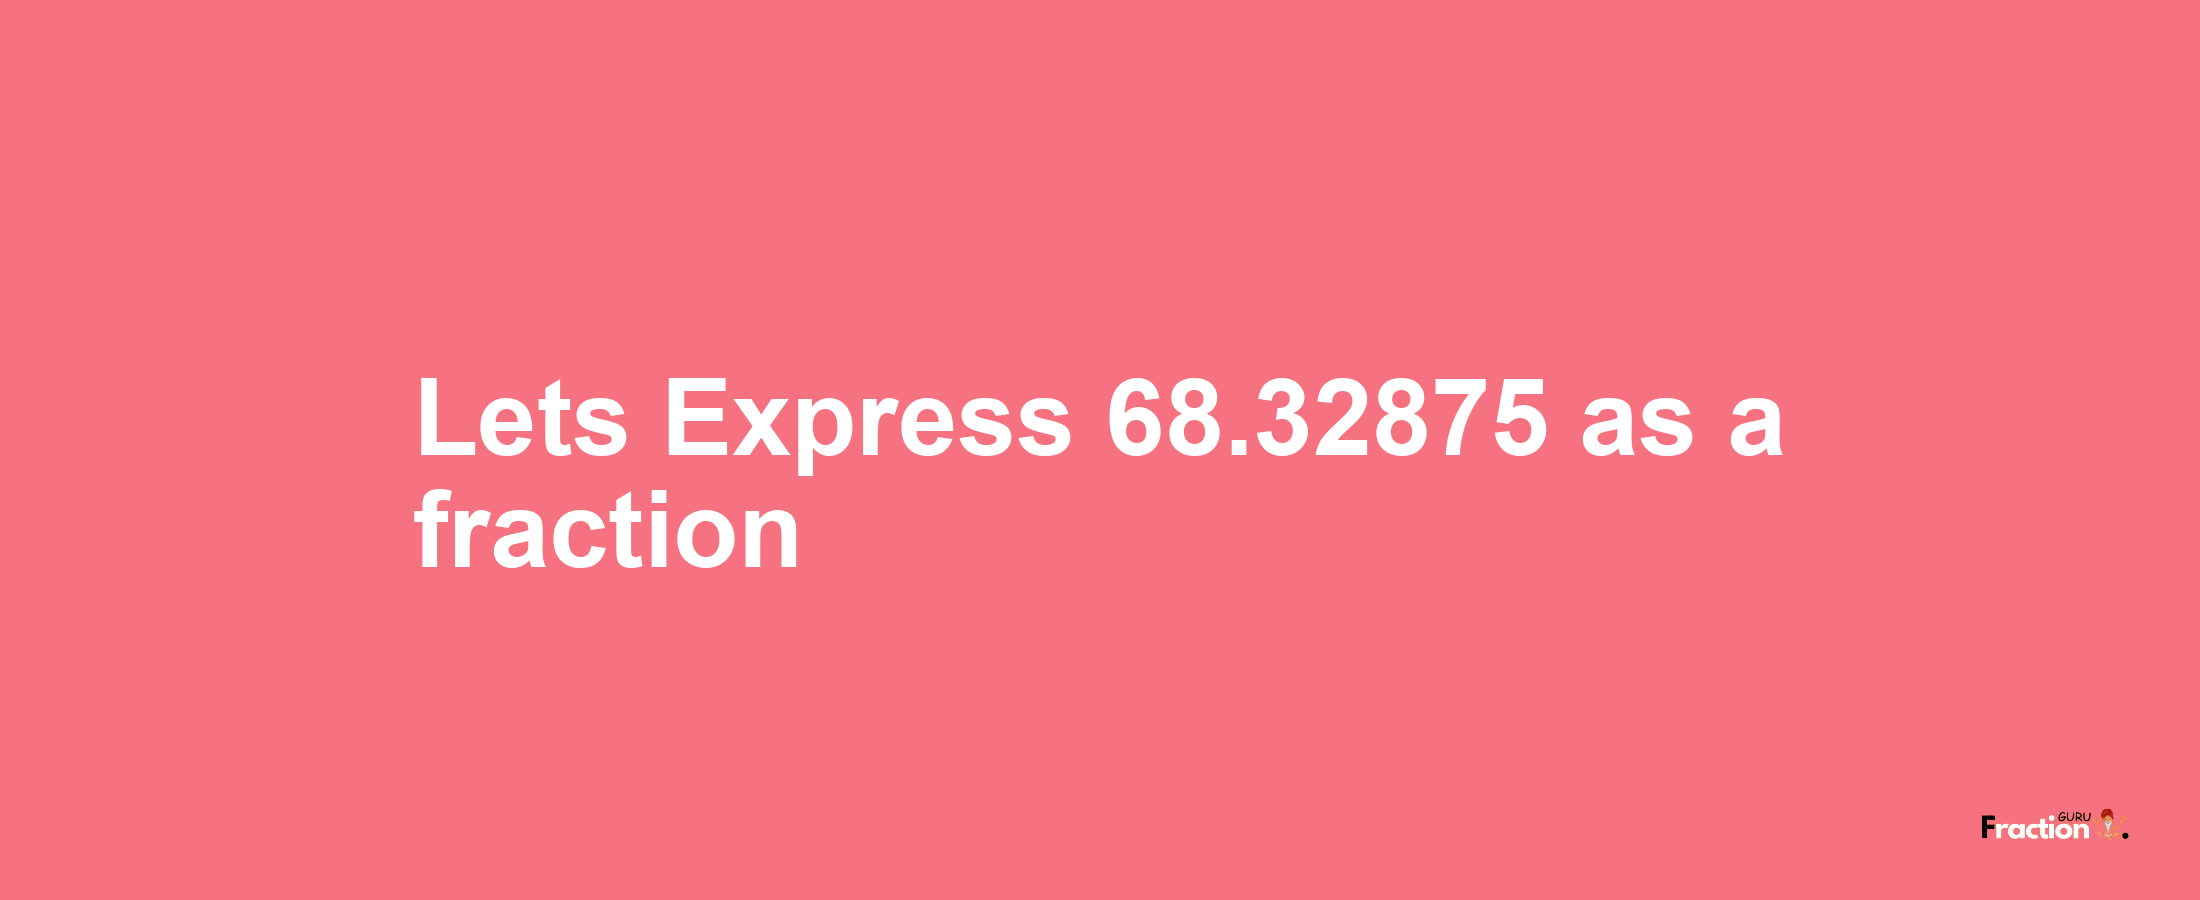 Lets Express 68.32875 as afraction